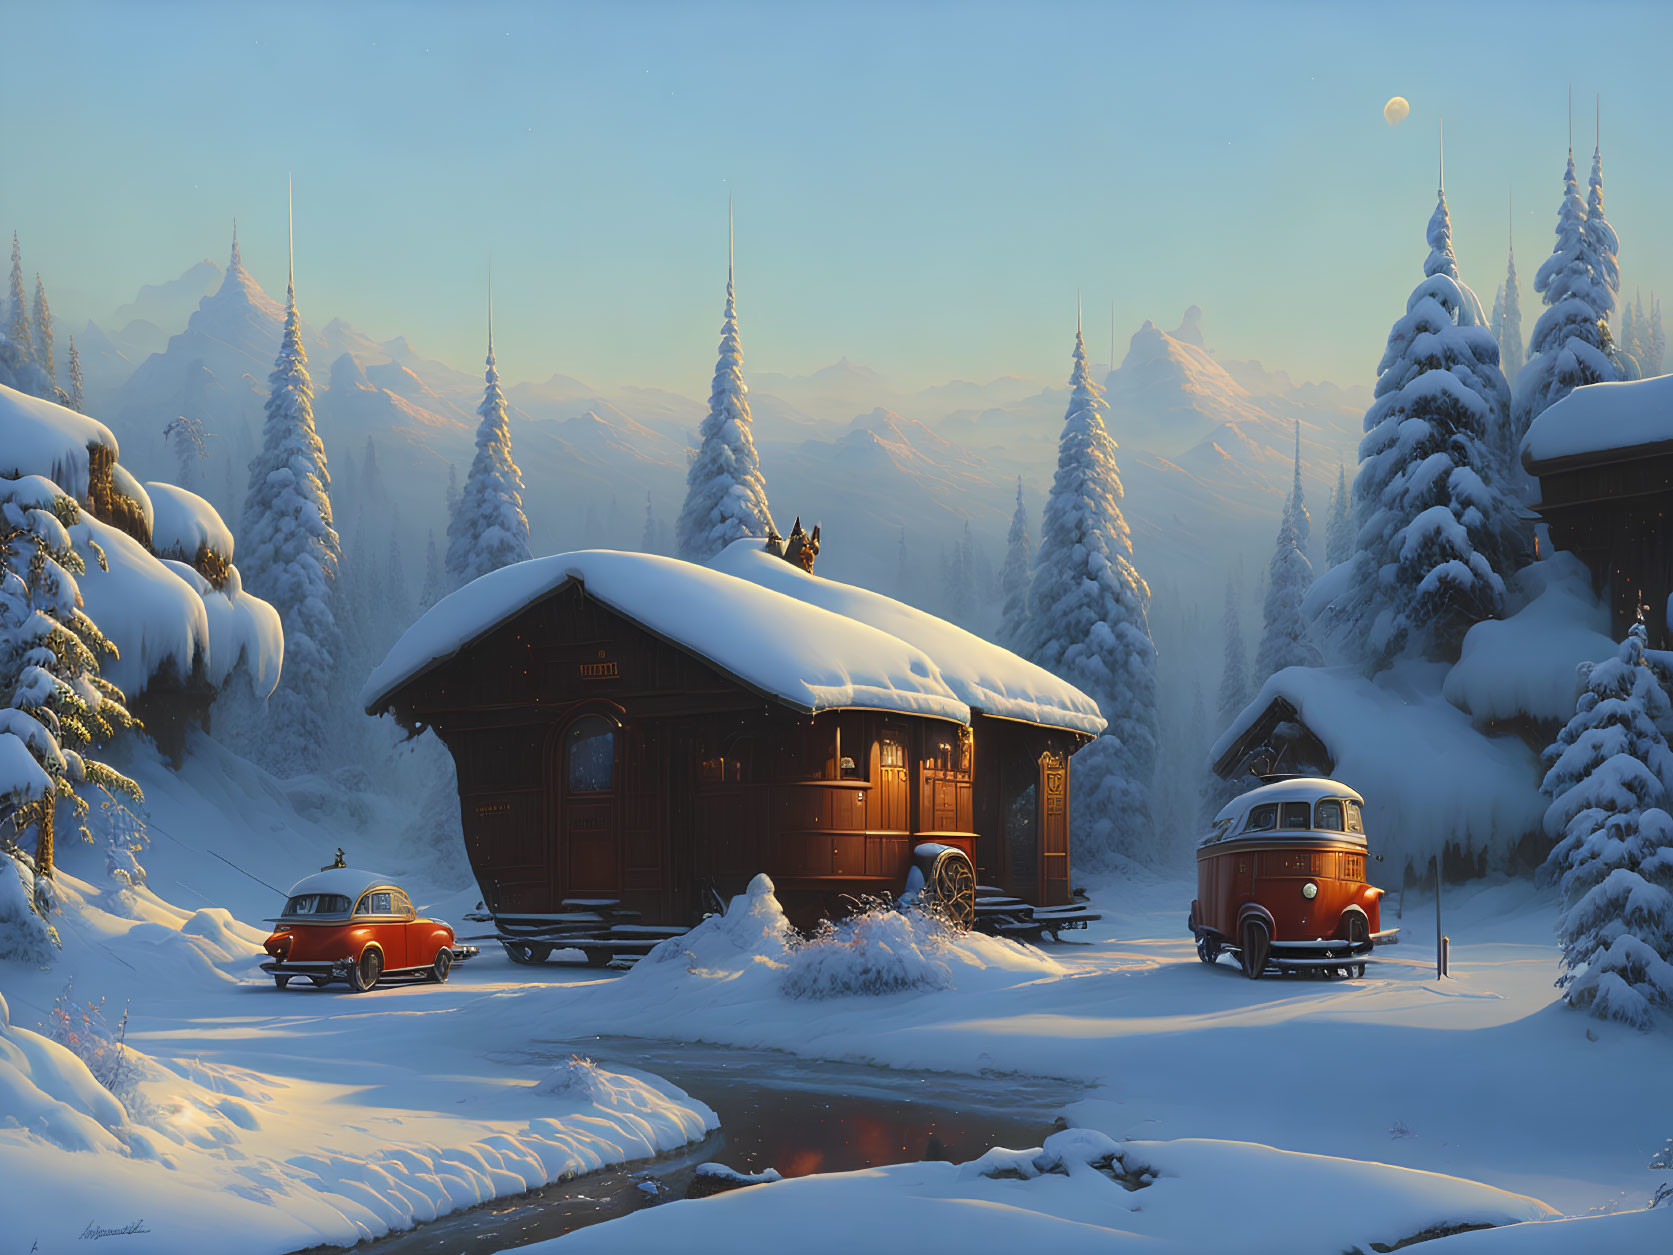 Cozy cabin in snow with red car and van, pine trees, mountains, twilight sky